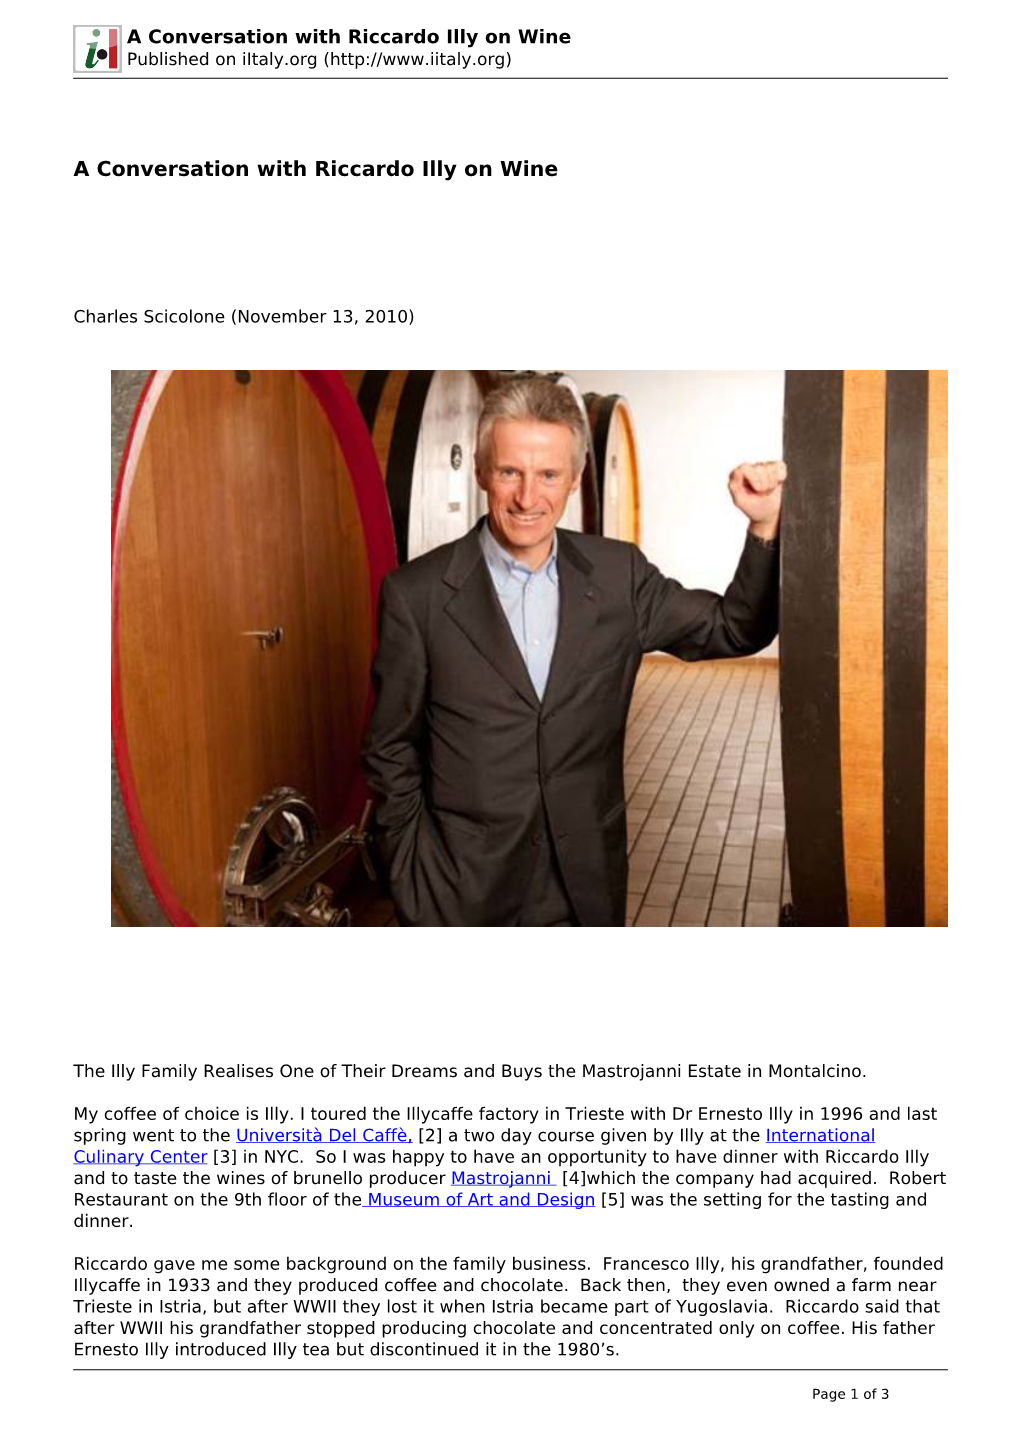 A Conversation with Riccardo Illy on Wine Published on Iitaly.Org (